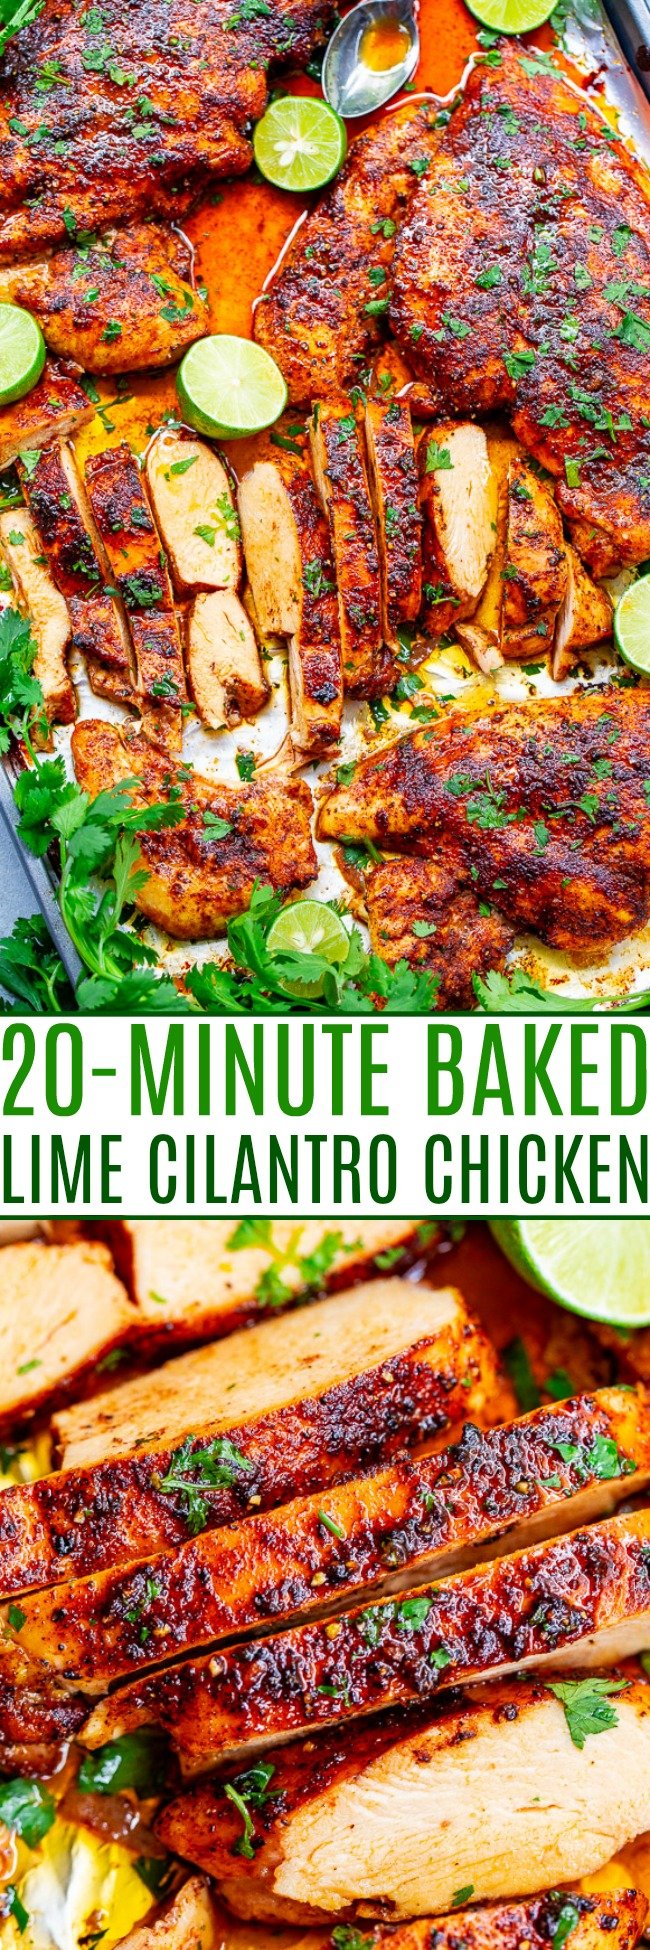 20-Minute Baked Cilantro Lime Chicken Breasts – Super juicy, EASY, tender chicken that’s ready in 20 minutes and made on ONE sheet pan!! Bursting with robust Mexican-inspired lime cilantro flavors that will make this an automatic family FAVORITE!!